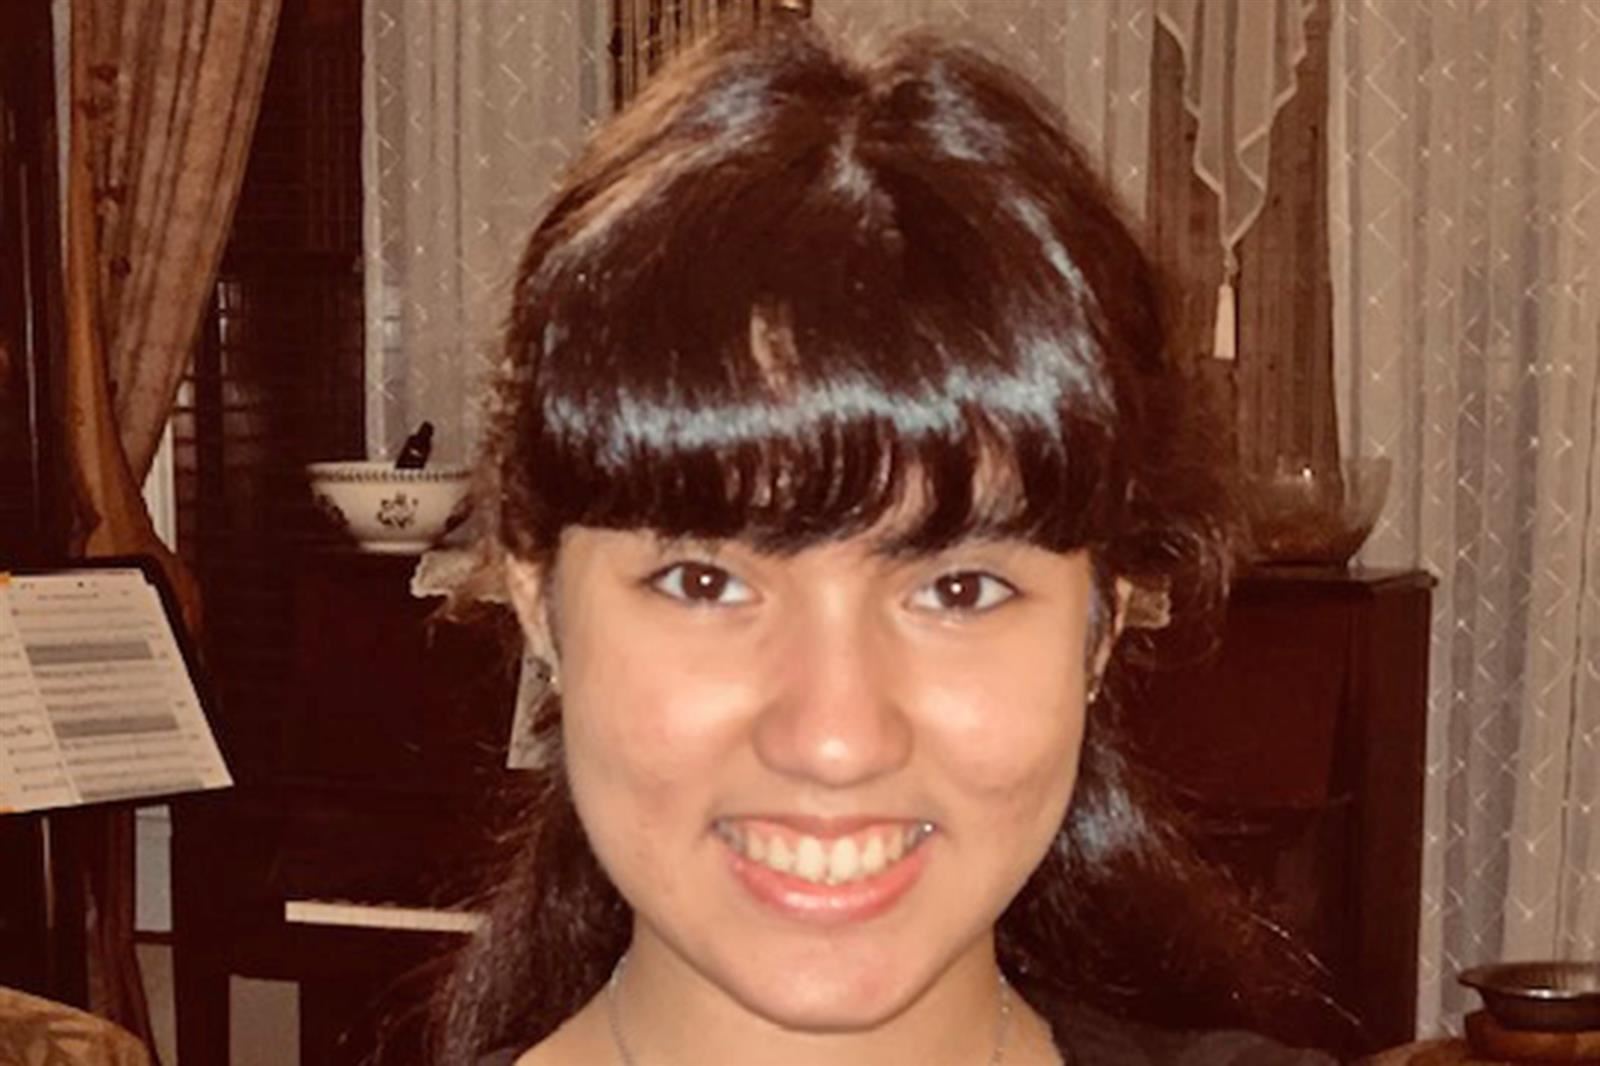 CFISD Student of the Week: Laylee Taghizadeh.